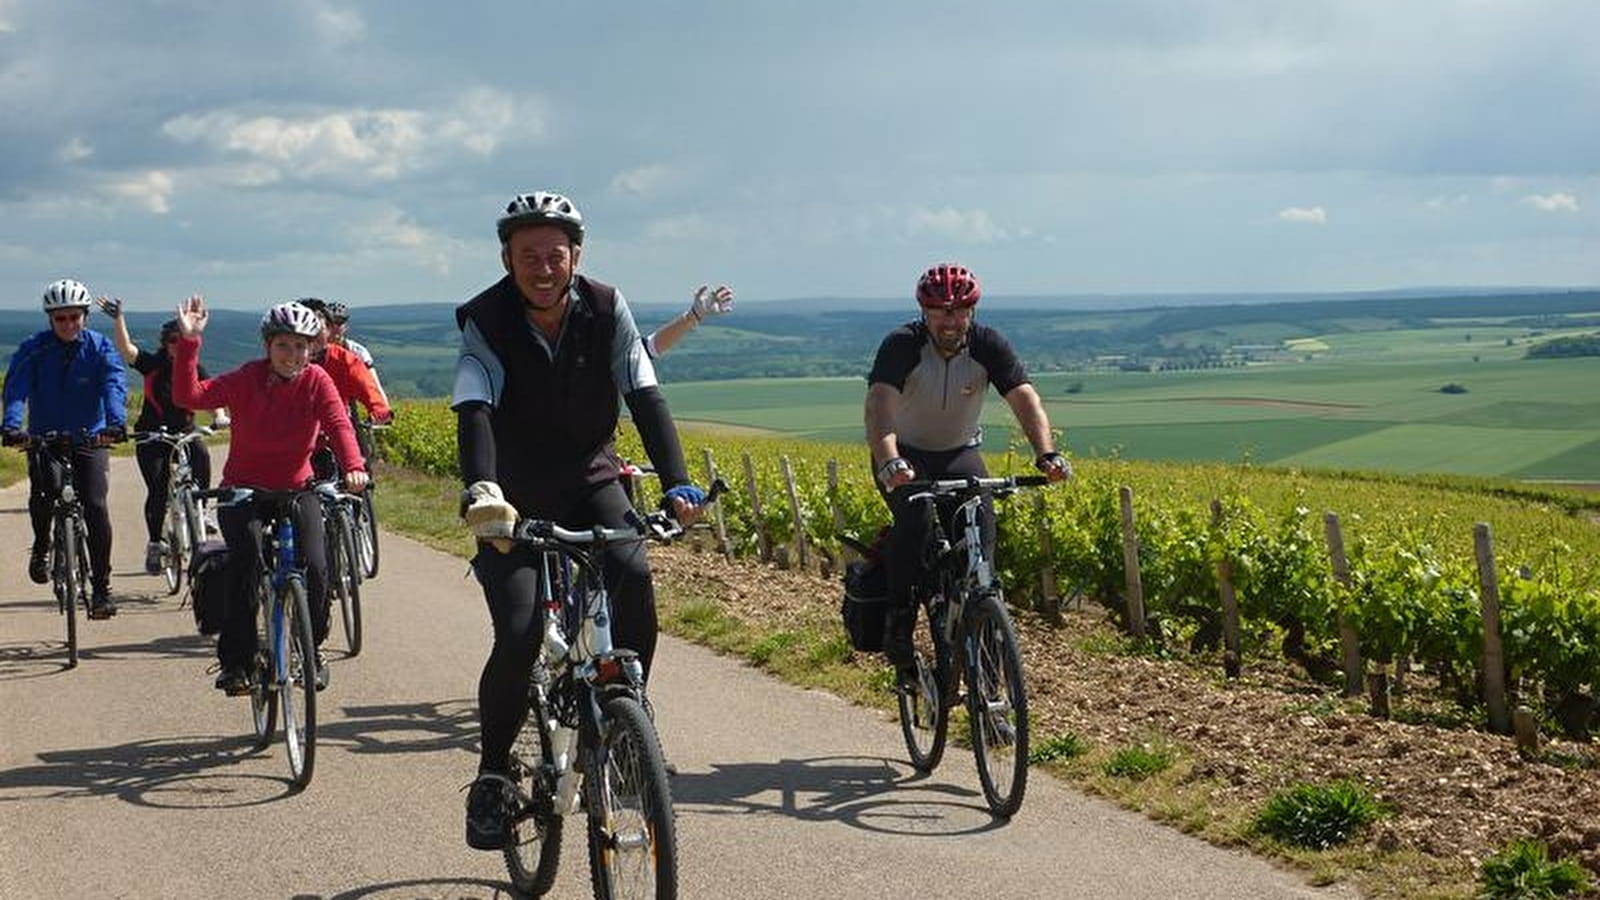 Guided bike ride - Auxerre vineyards - Escolives - Coulanges 